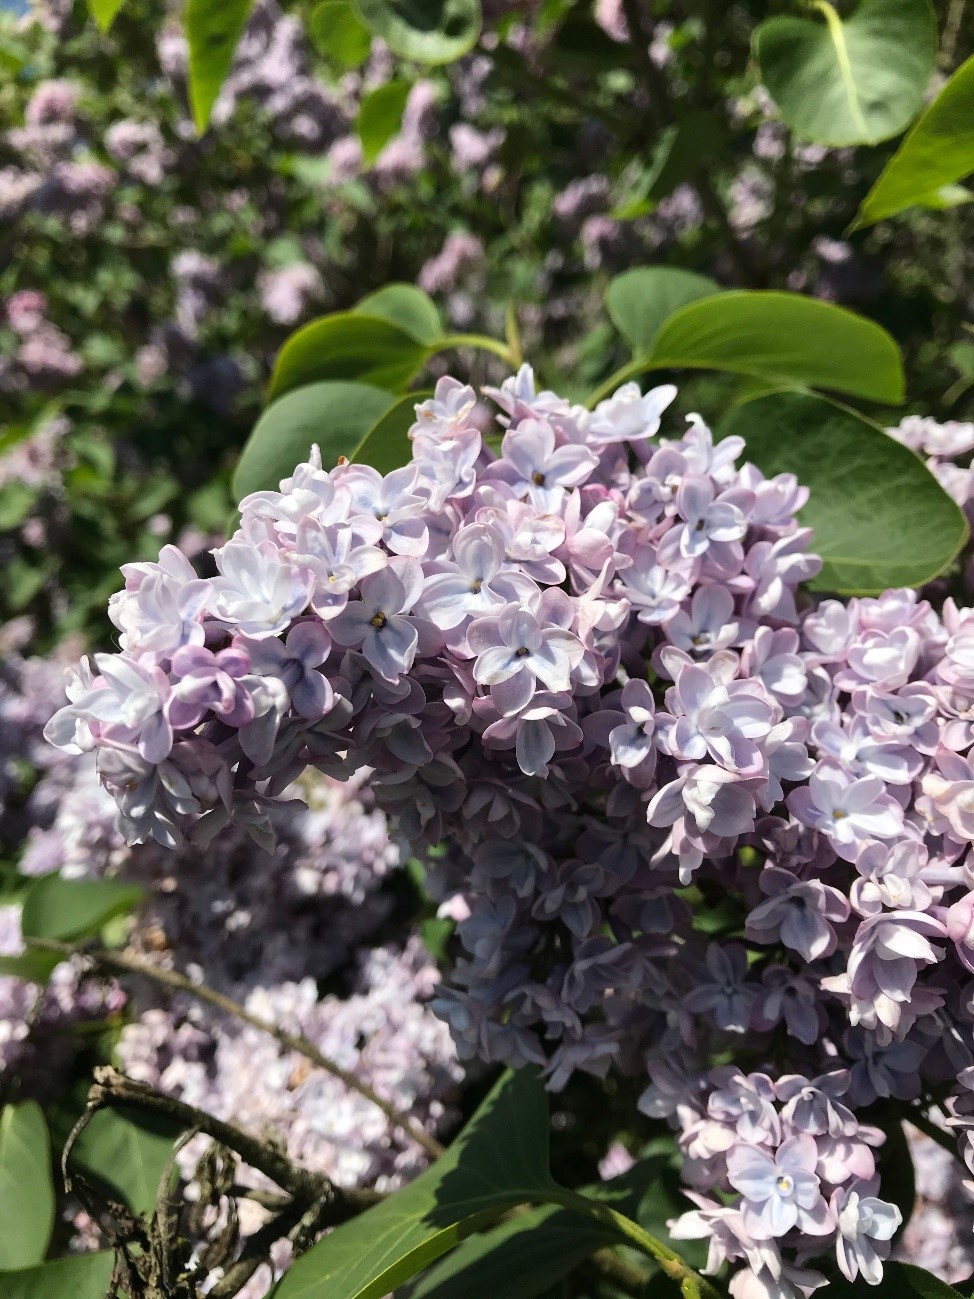 Syringa vulgaris, Lilac, fills the air with scent in May